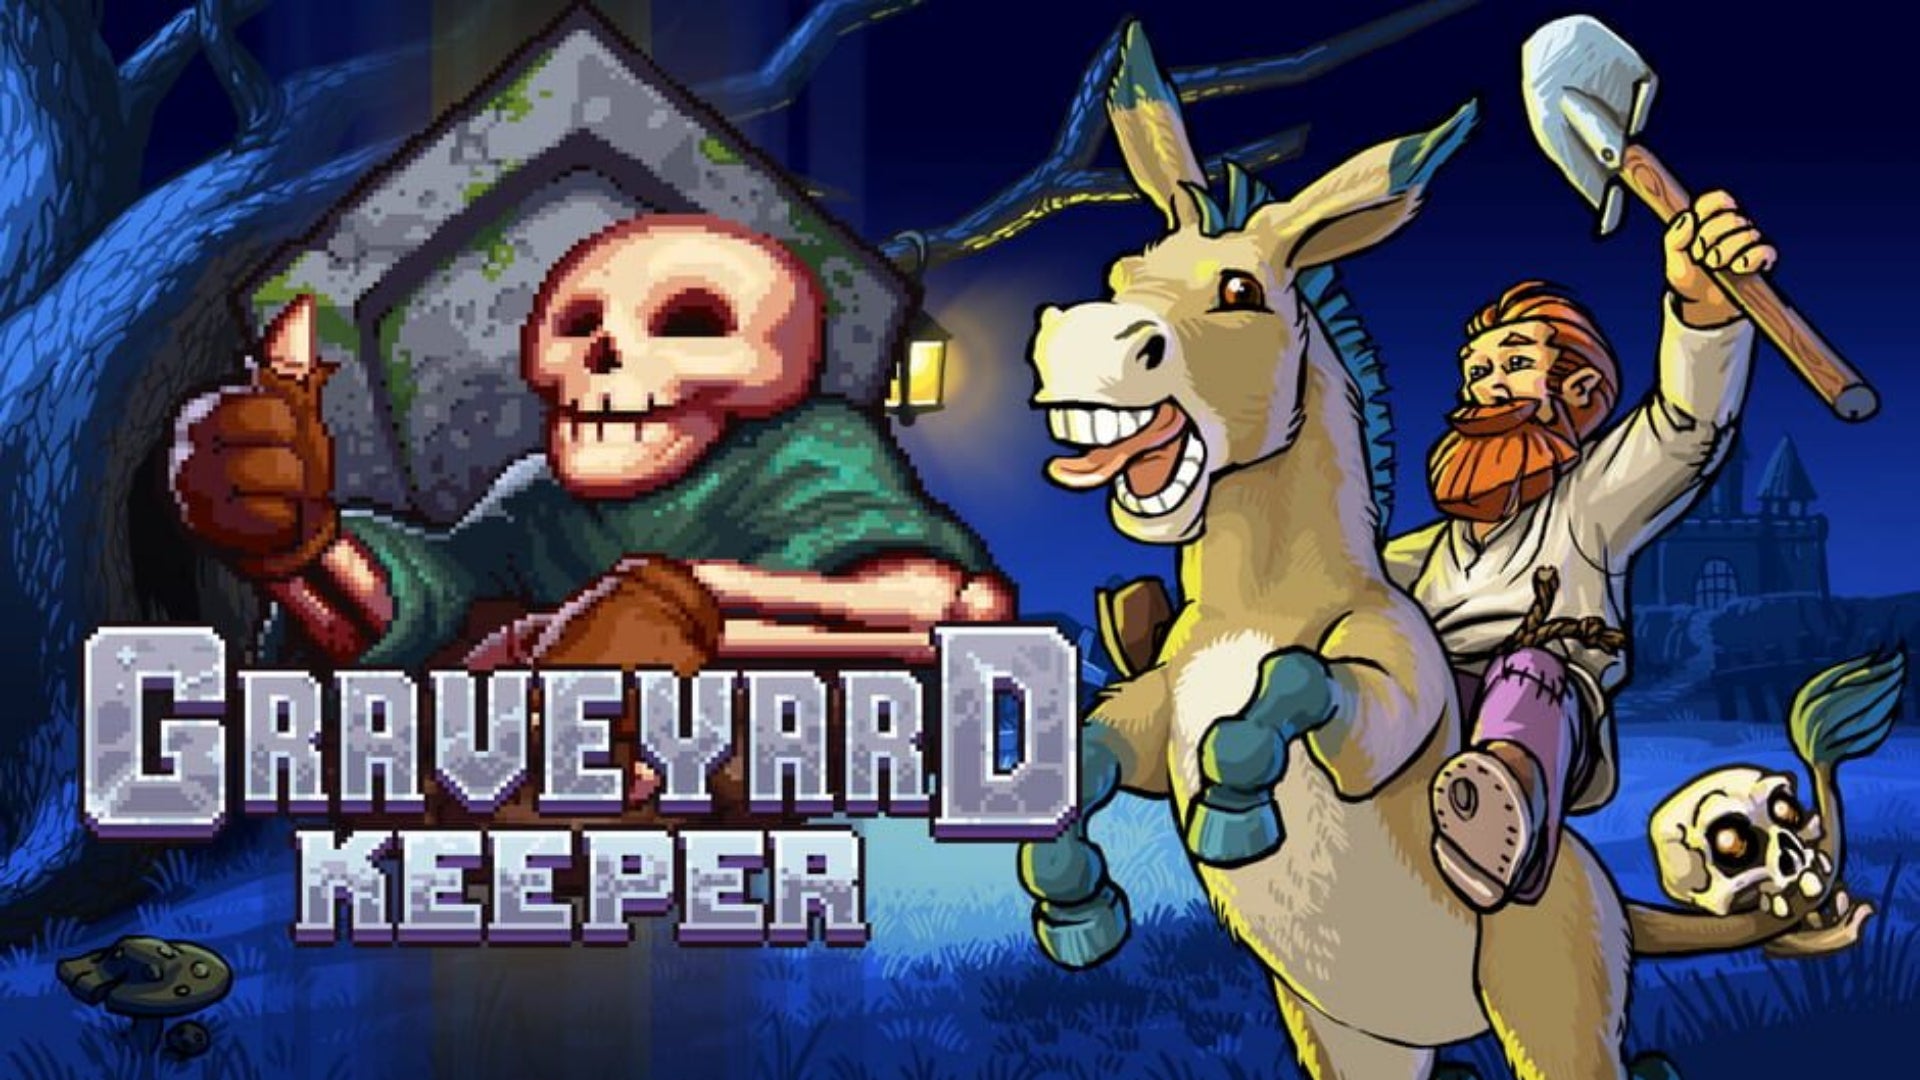 A skull, Gerry, sits over the Graveyard Keeper logo with the unnamed Keeper riding a donkey while holding a shovel beside him.